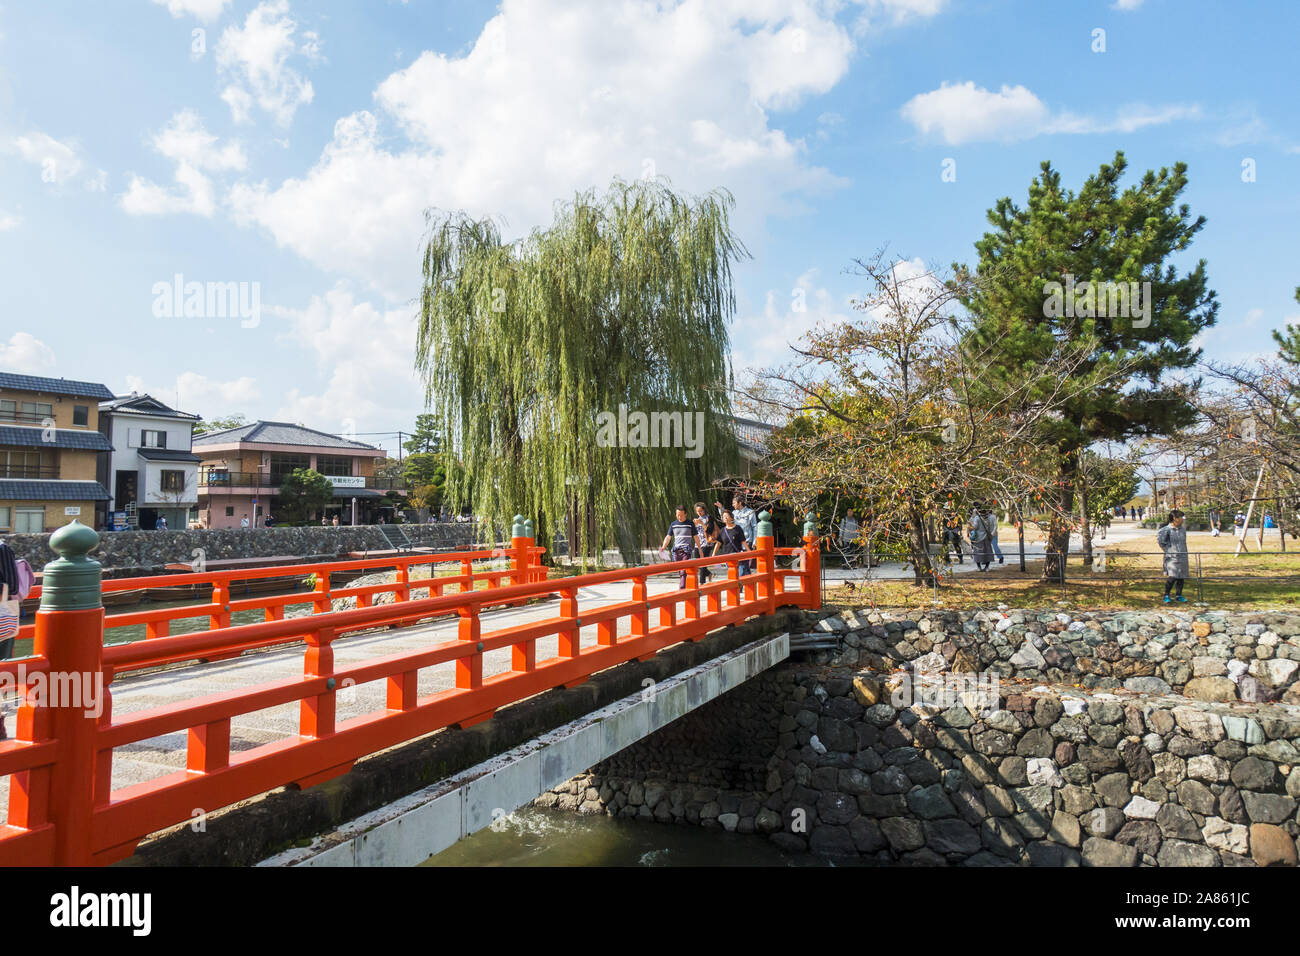 Uji, Kyoto Prefecture, Japan - October 27th, 2019: People sightseeing in Uji, a city on the southern outskirts of the city, on a sunny autumnd day. Stock Photo